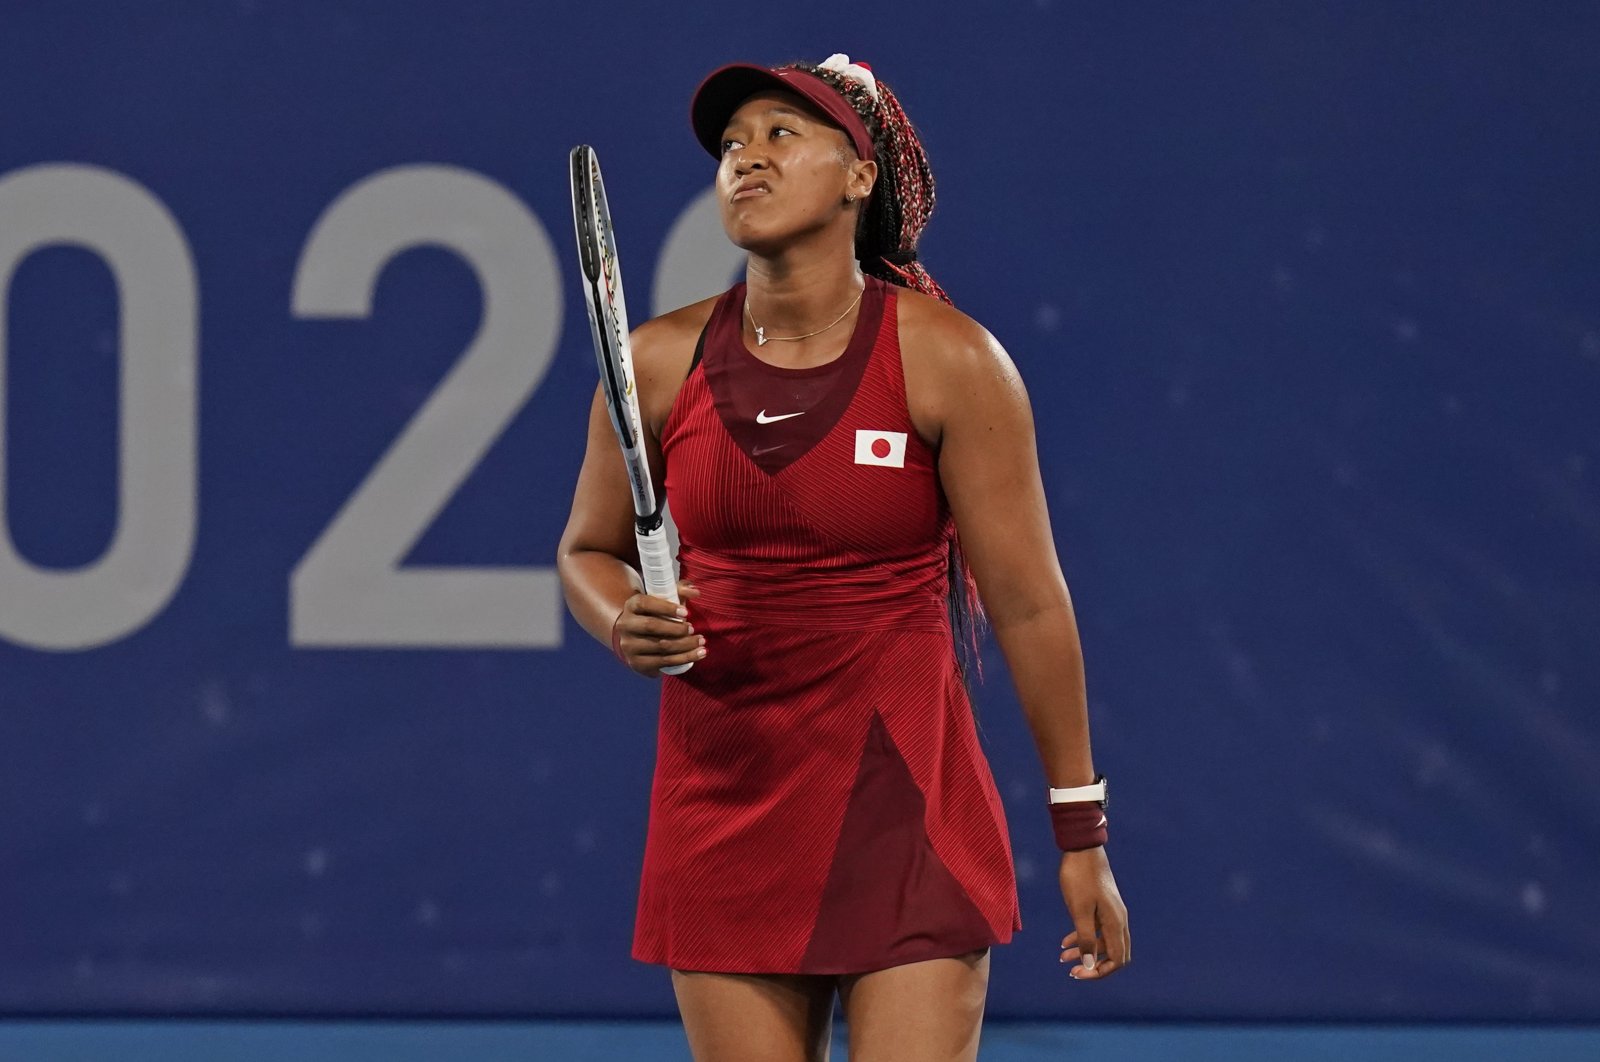 Naomi Osaka, of Japan, reacts after losing a point to Marketa Vondrousova, of the Czech Republic, during the third round of the tennis competition at the 2020 Summer Olympics, in Tokyo, Japan, July 27, 2021. (AP Photo)